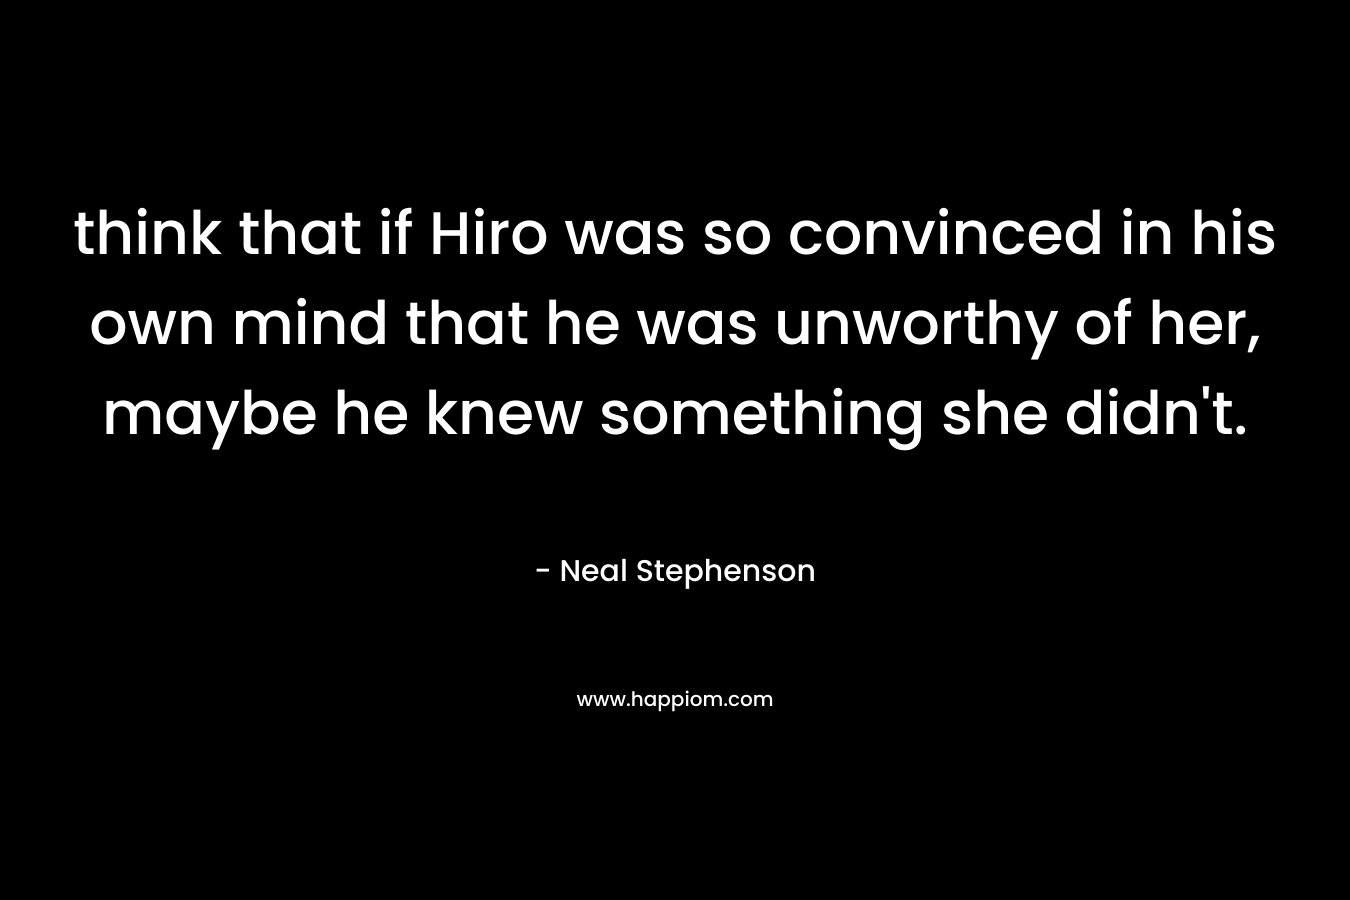 think that if Hiro was so convinced in his own mind that he was unworthy of her, maybe he knew something she didn’t. – Neal Stephenson